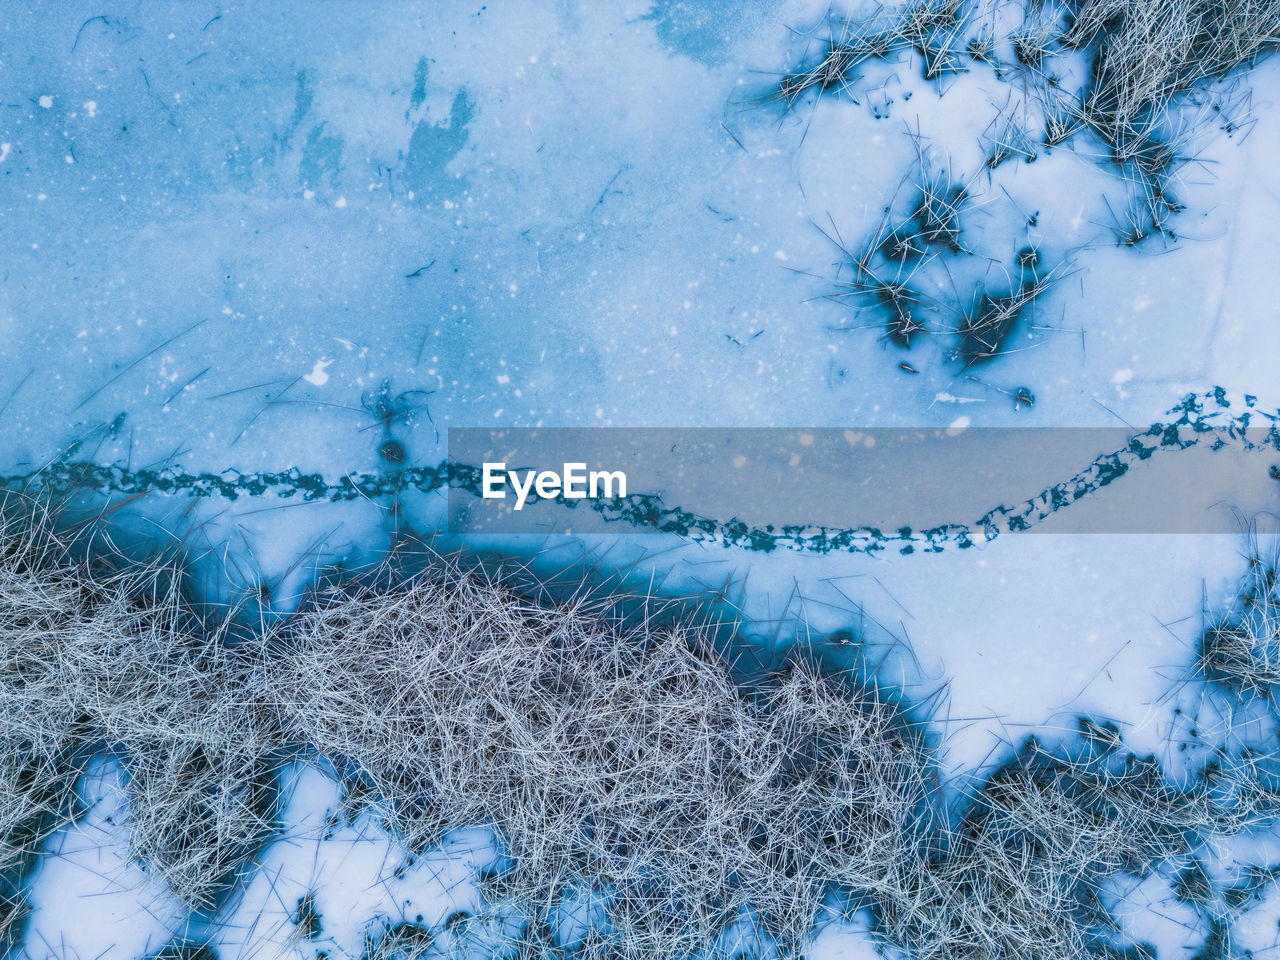 Panoramic aerial view of a frozen lake with animal footprints. animal tracks on the frozen surface 